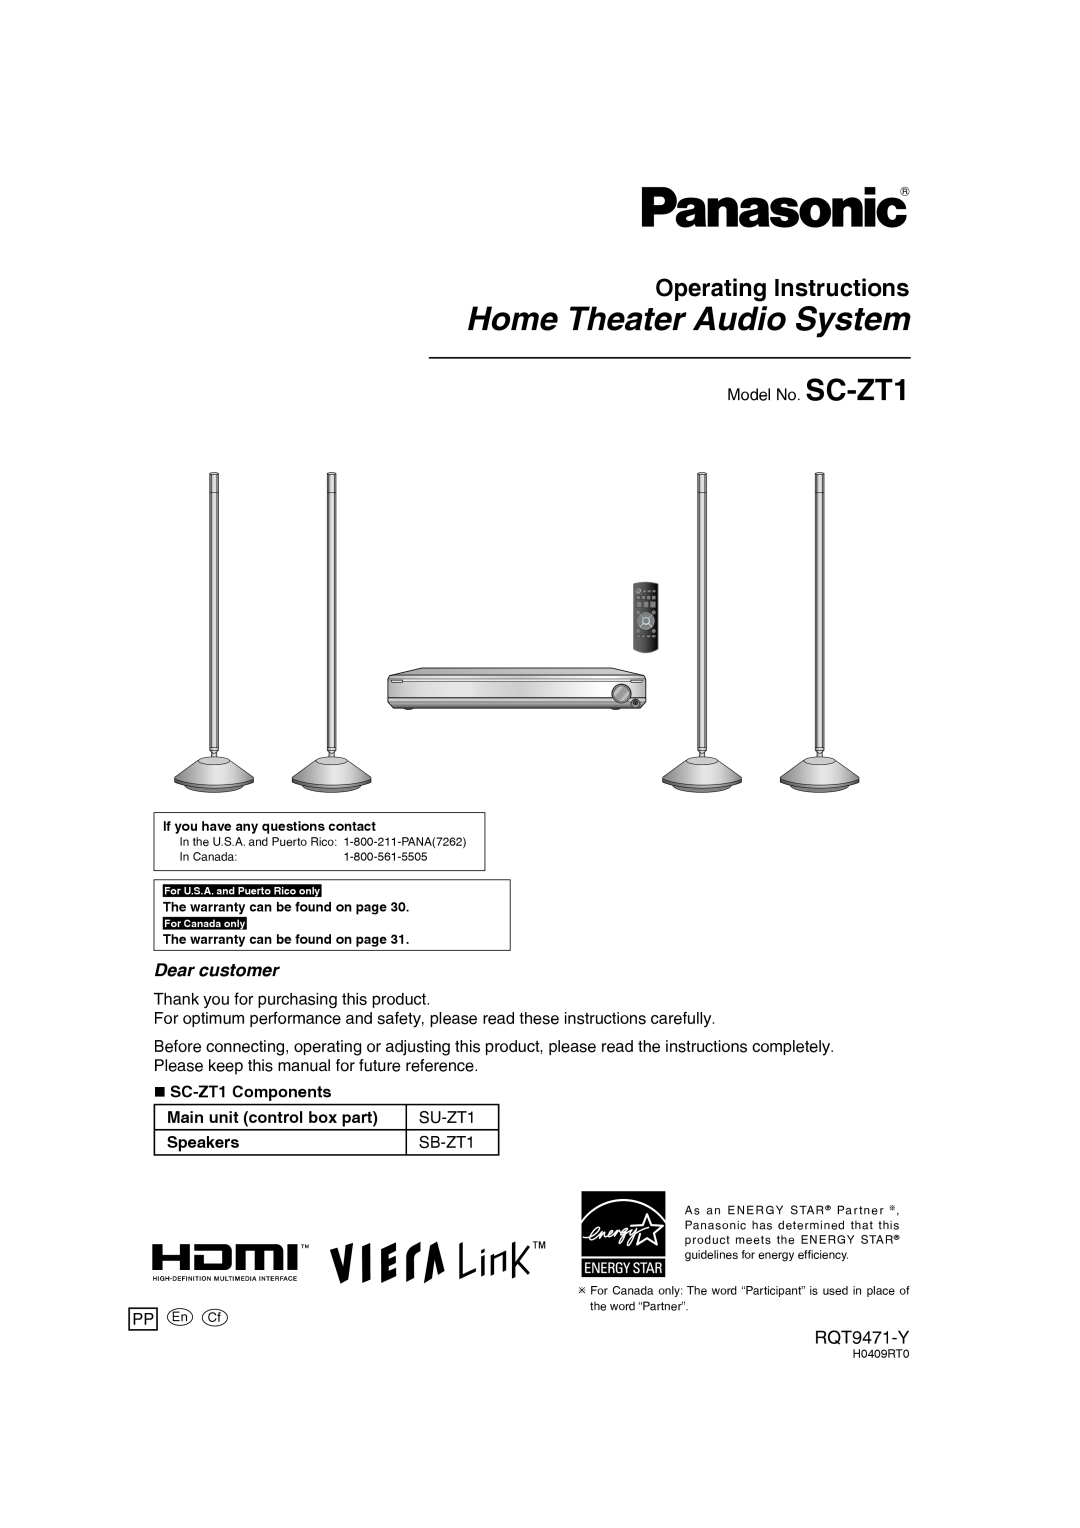 Panasonic warranty Operating Instructions, RQT9471-Y, Home Theater Audio System, „ SC-ZT1Components, Speakers 